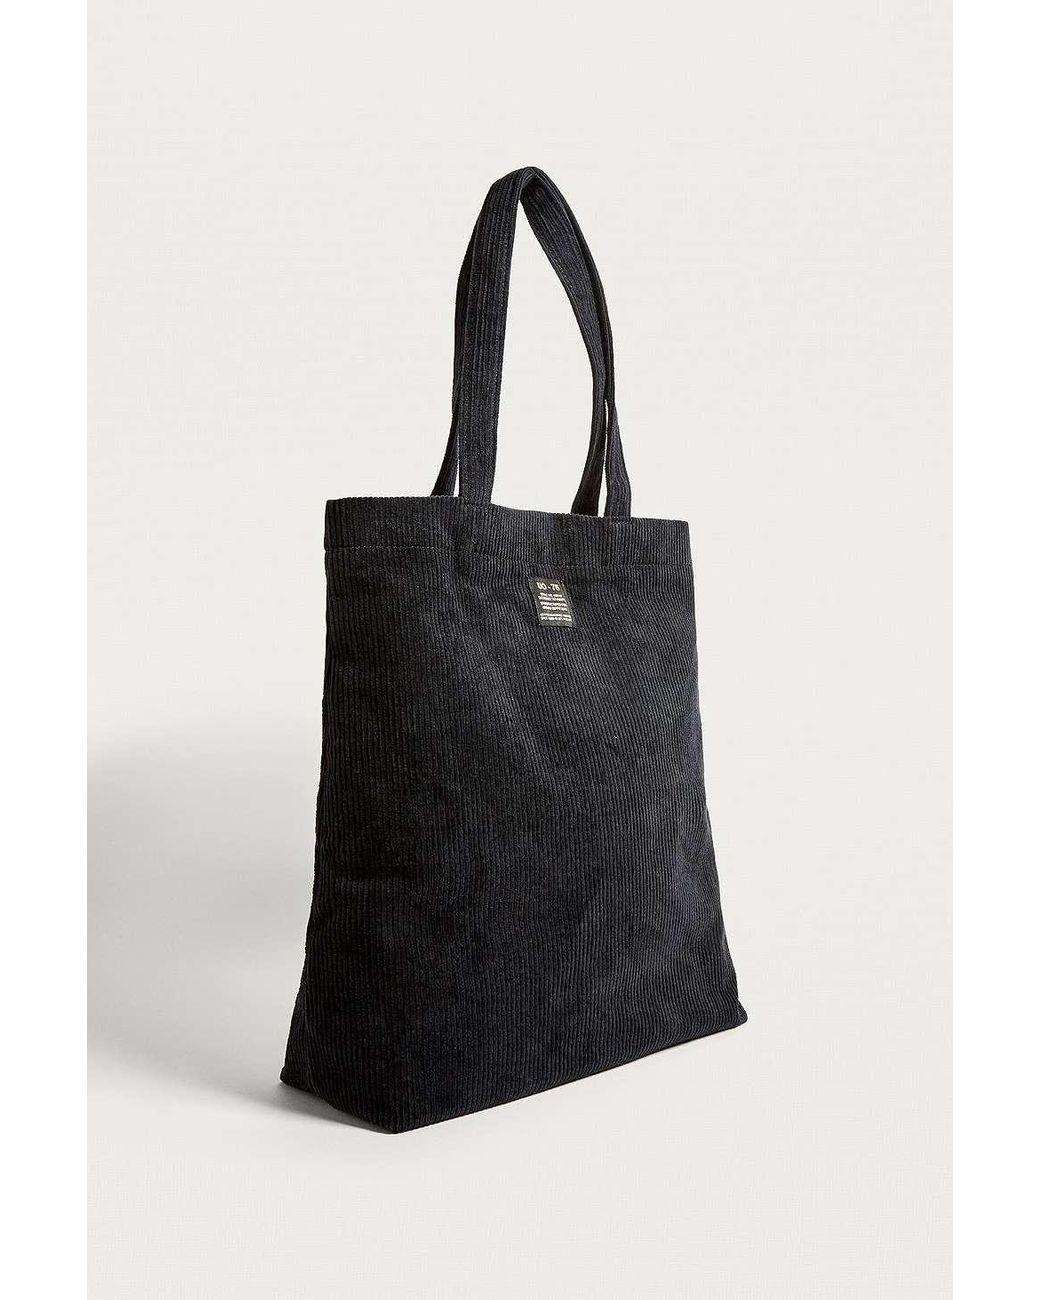 Urban Outfitters Uo Corduroy Tote Bag in Black | Lyst UK